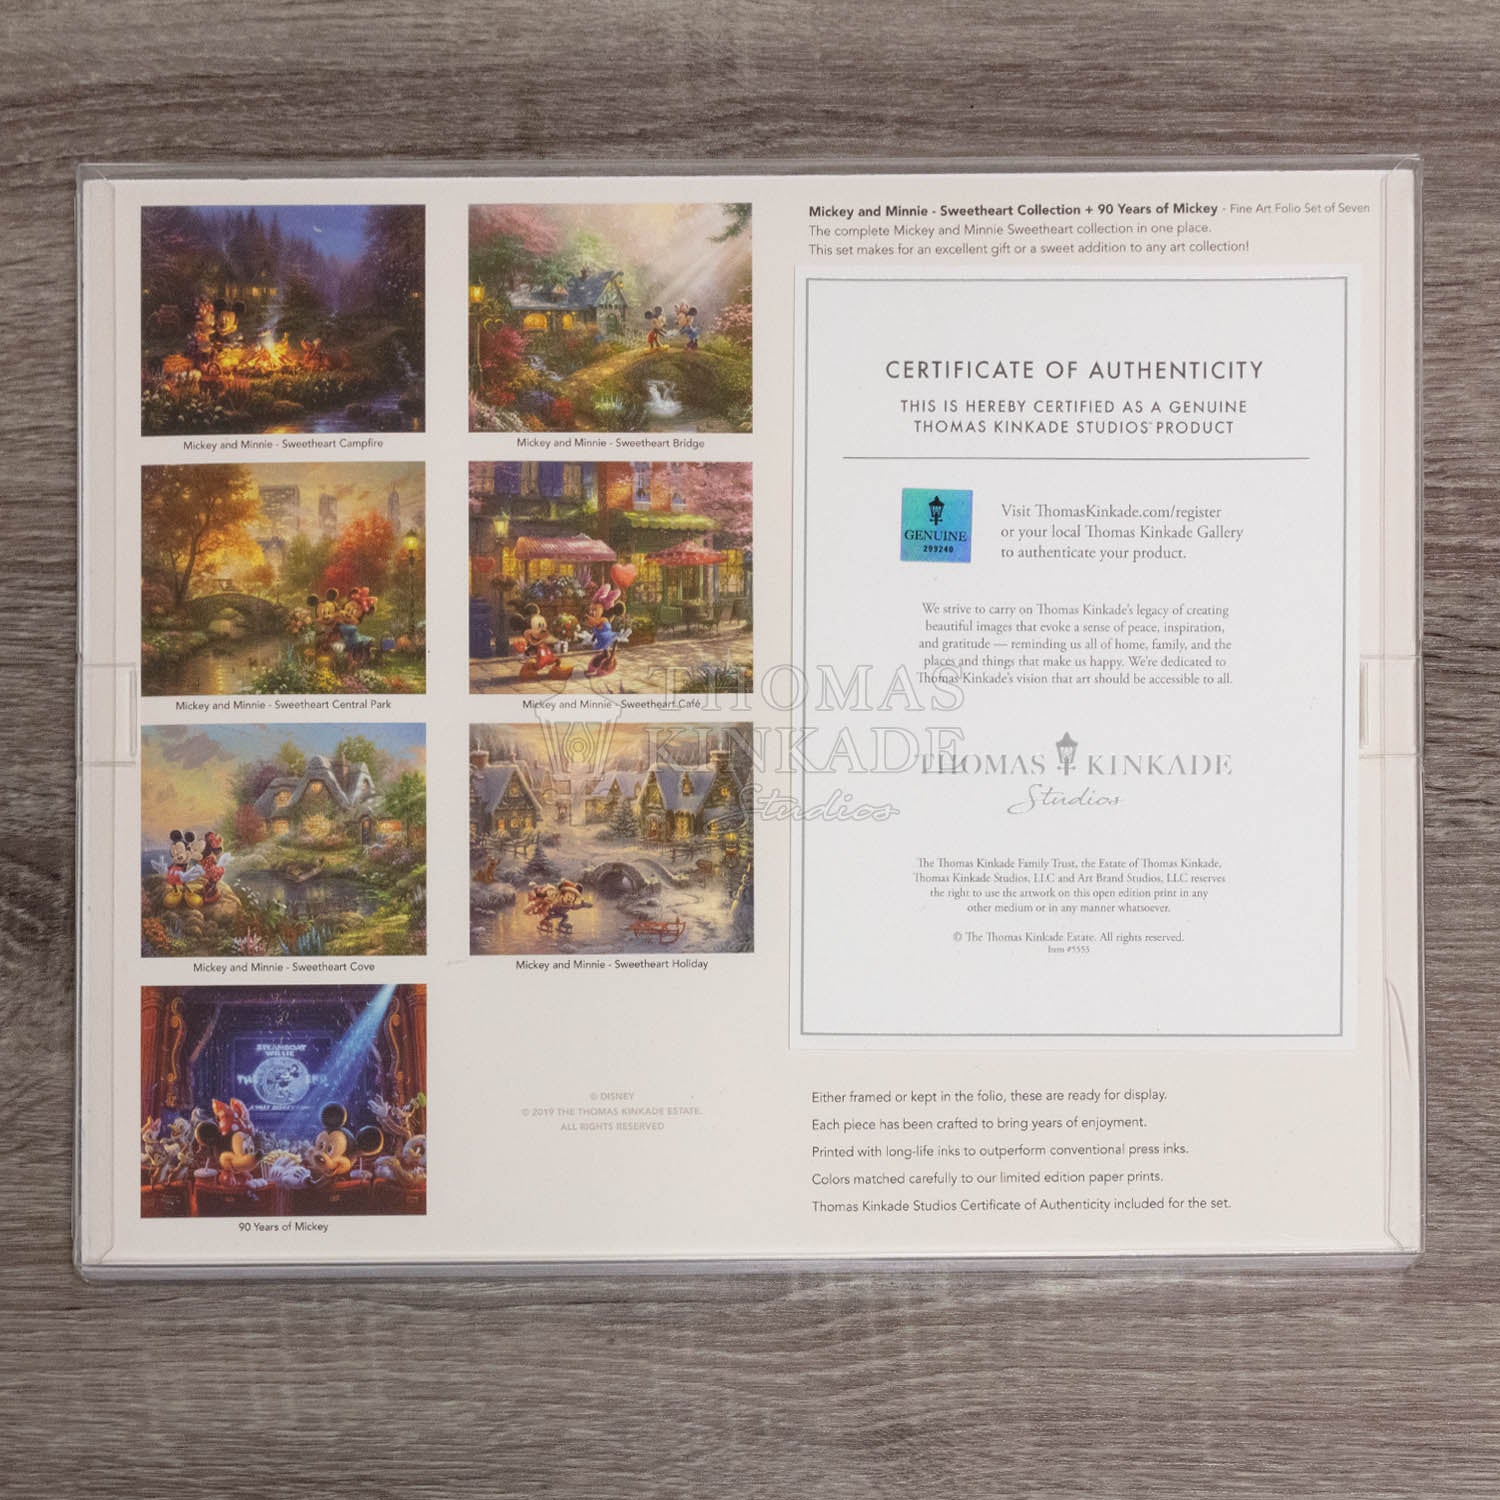 Fine Art Folio Set of Seven - Sweetheart Collection, plus 90 Years of Mickey. This set makes for an excellent gift or a sweet addition to any art collection.